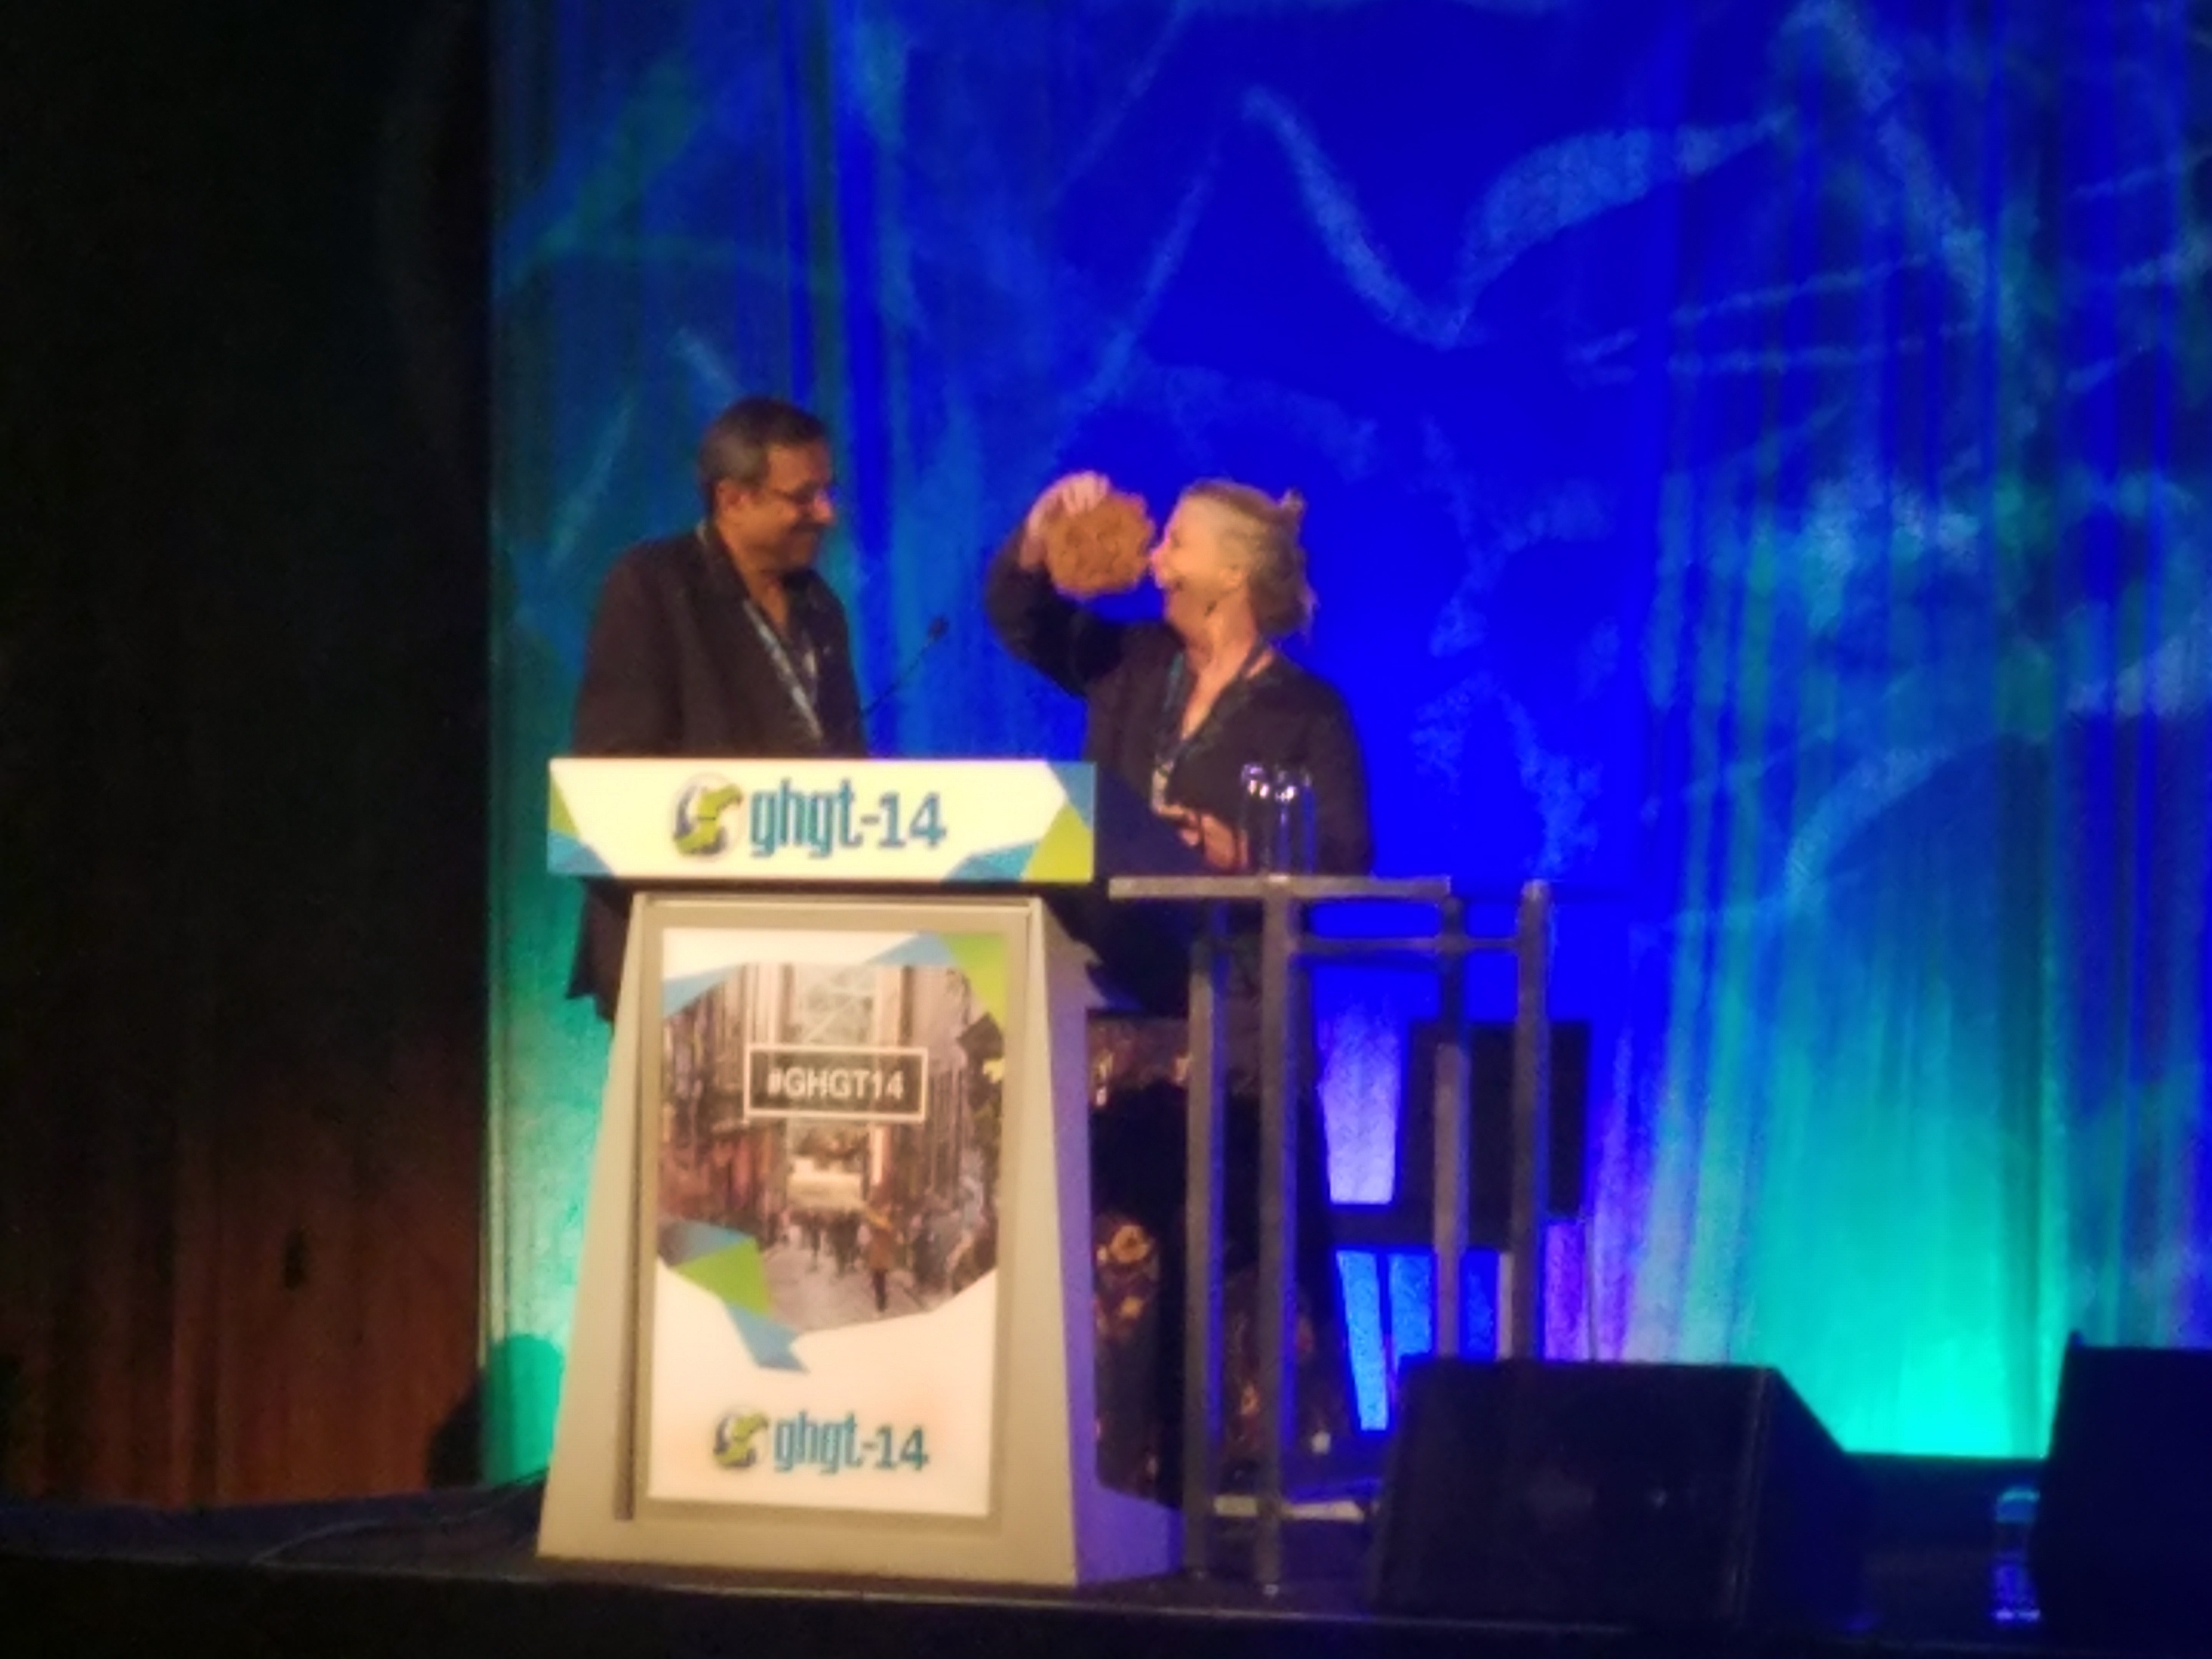 Susan Hovorka is handed the Greenman Award on stage for her contribution to greenhouse gas control technology